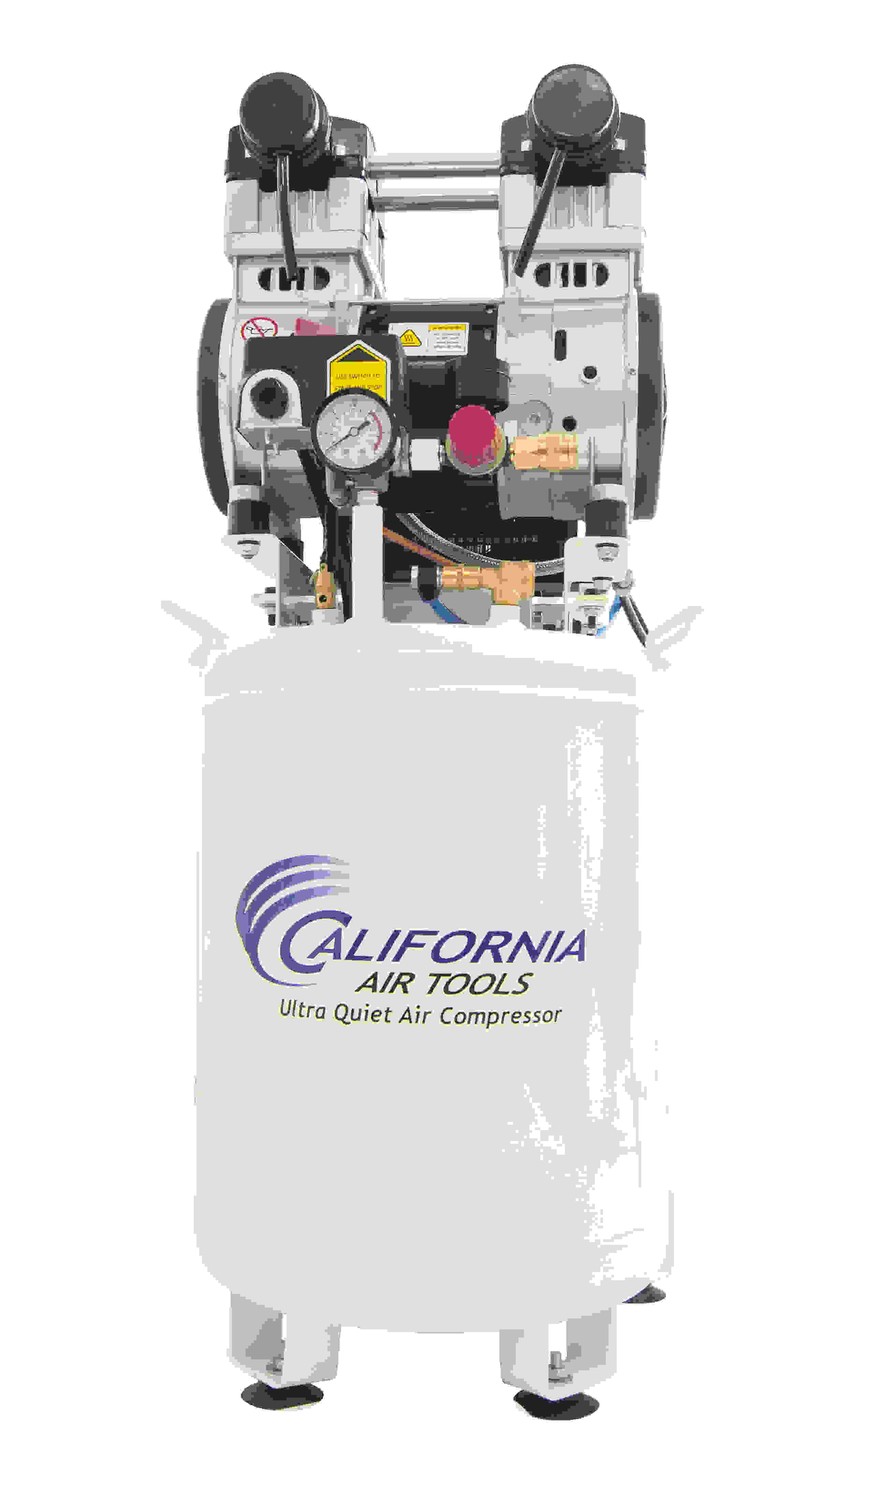 California Air Tools 10020DCAD-22060 Ultra Quiet & Oil-Free 2.0 Hp, 10.0 Gal. Steel Tank Air Compressor with Air Drying System (